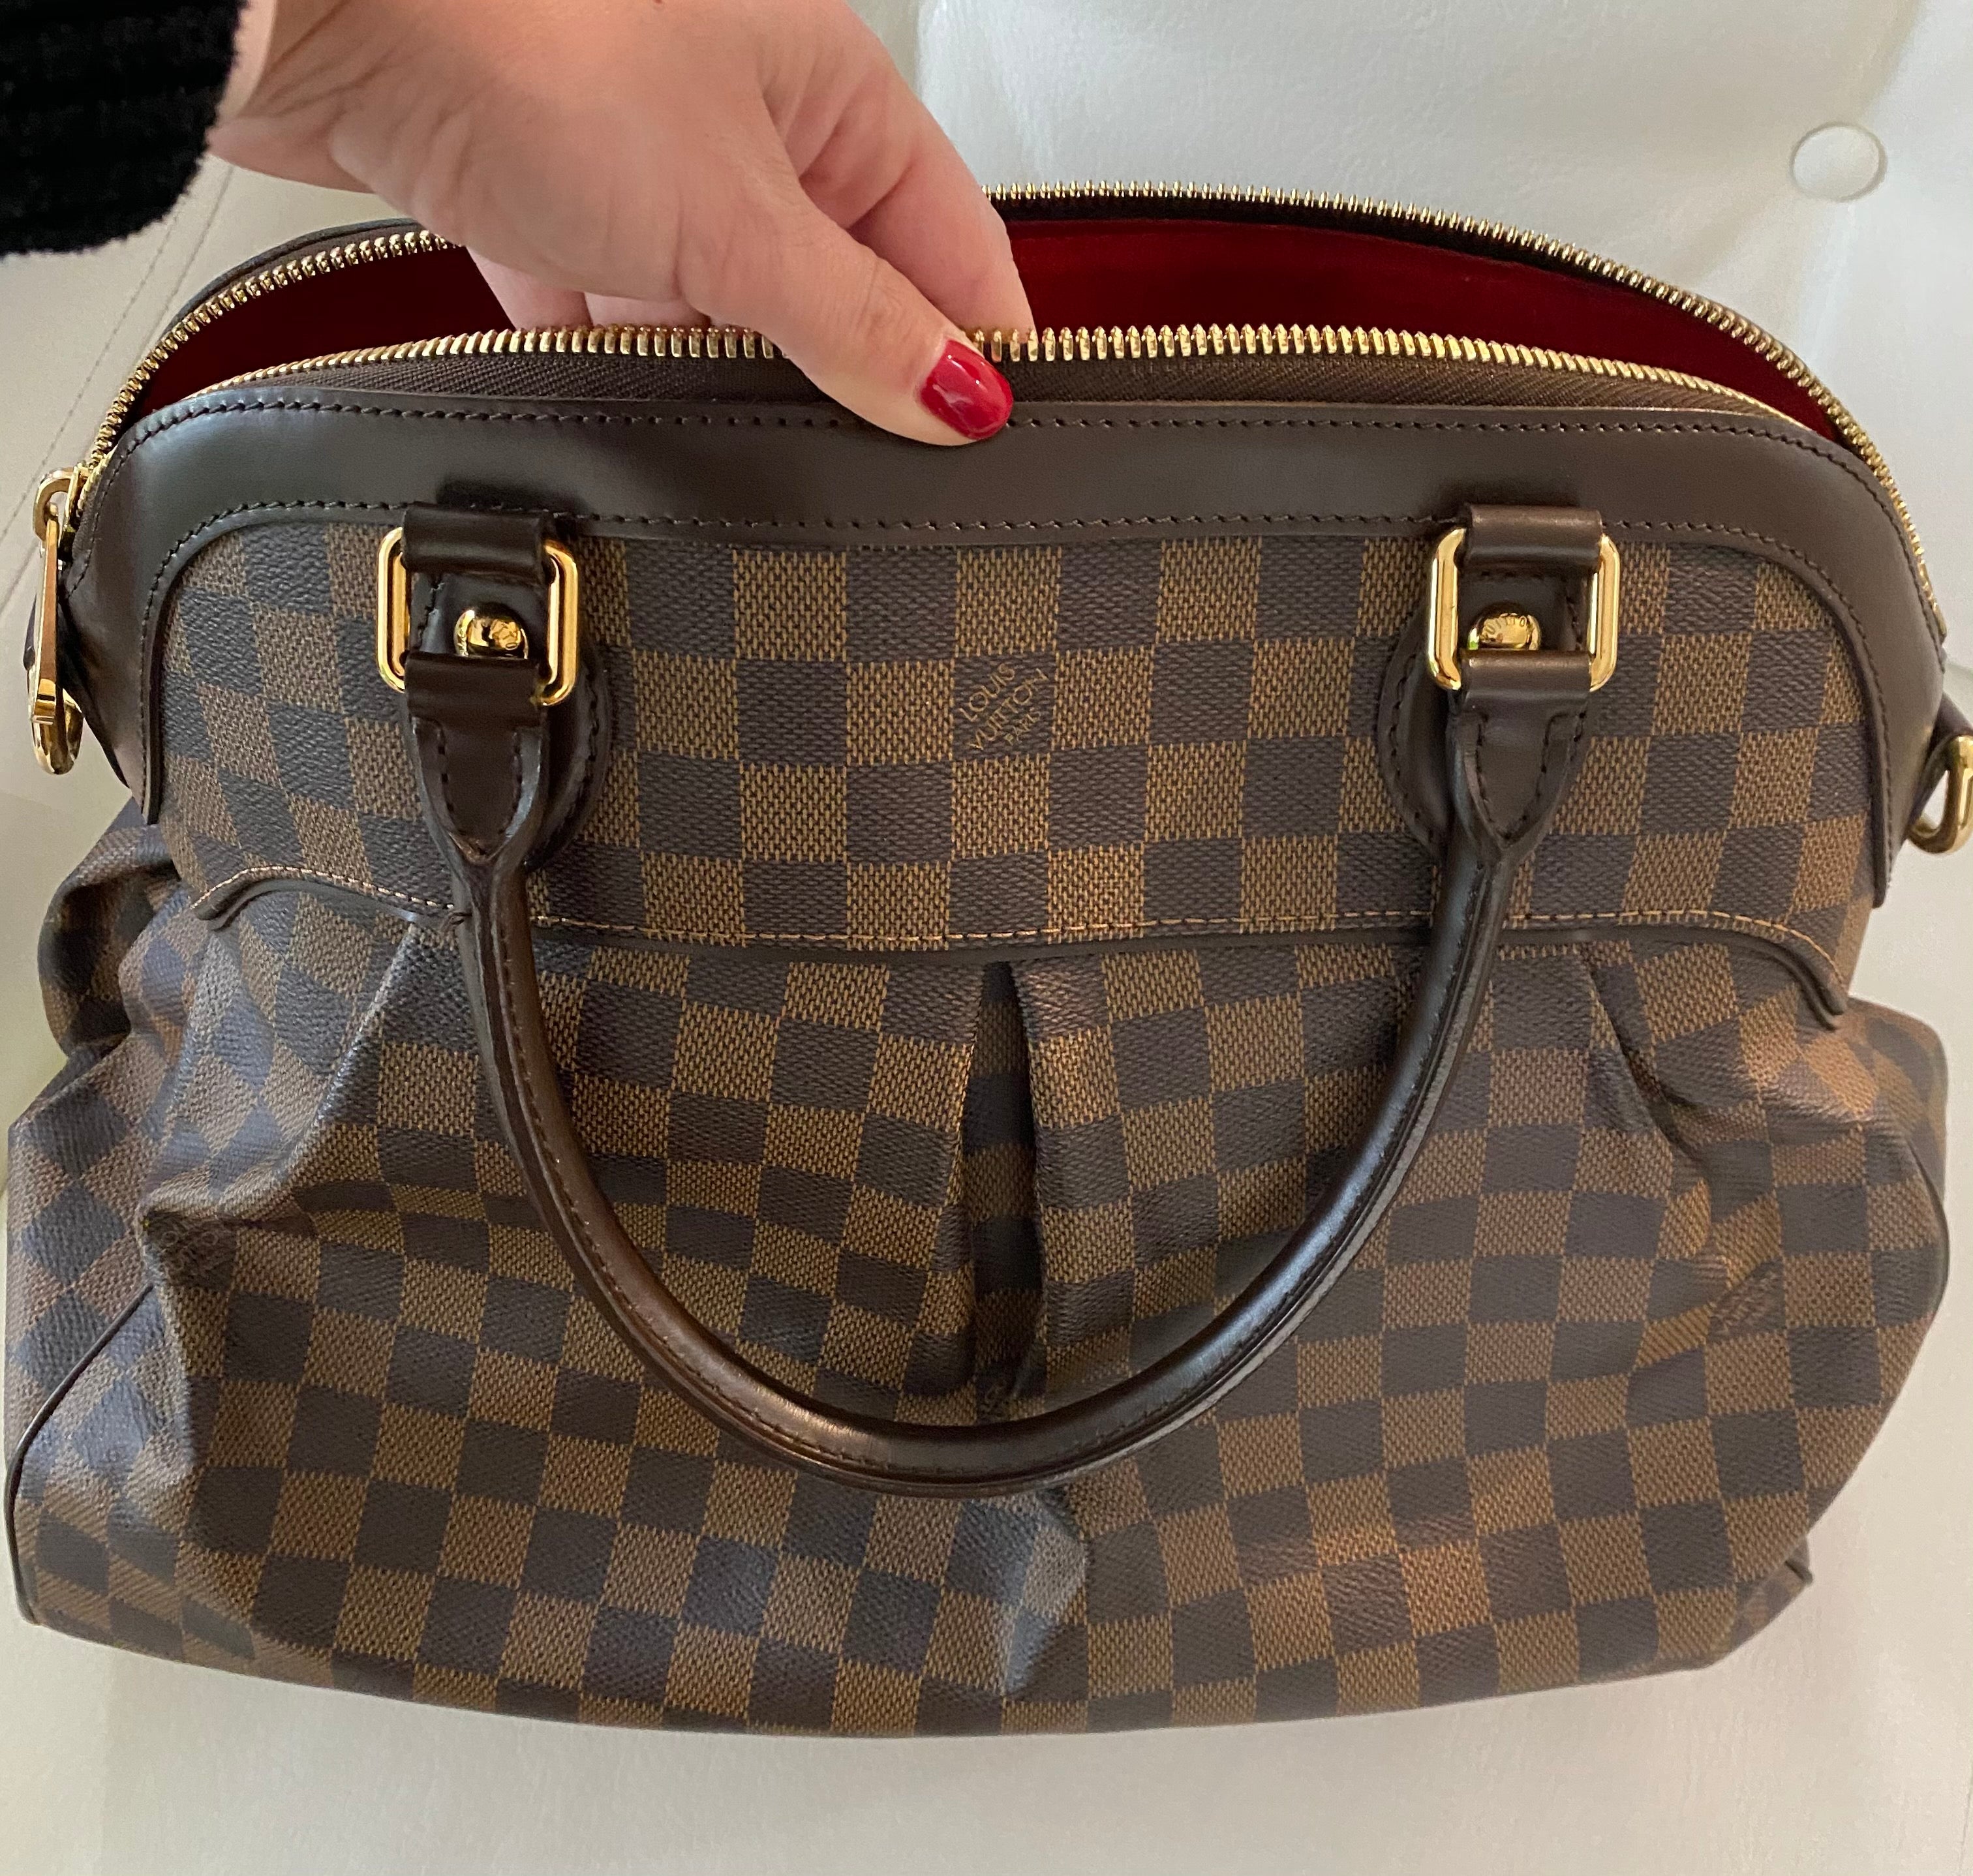 Authentic Louis Vuitton Damier Trevi PM with dustbag, box and receipt